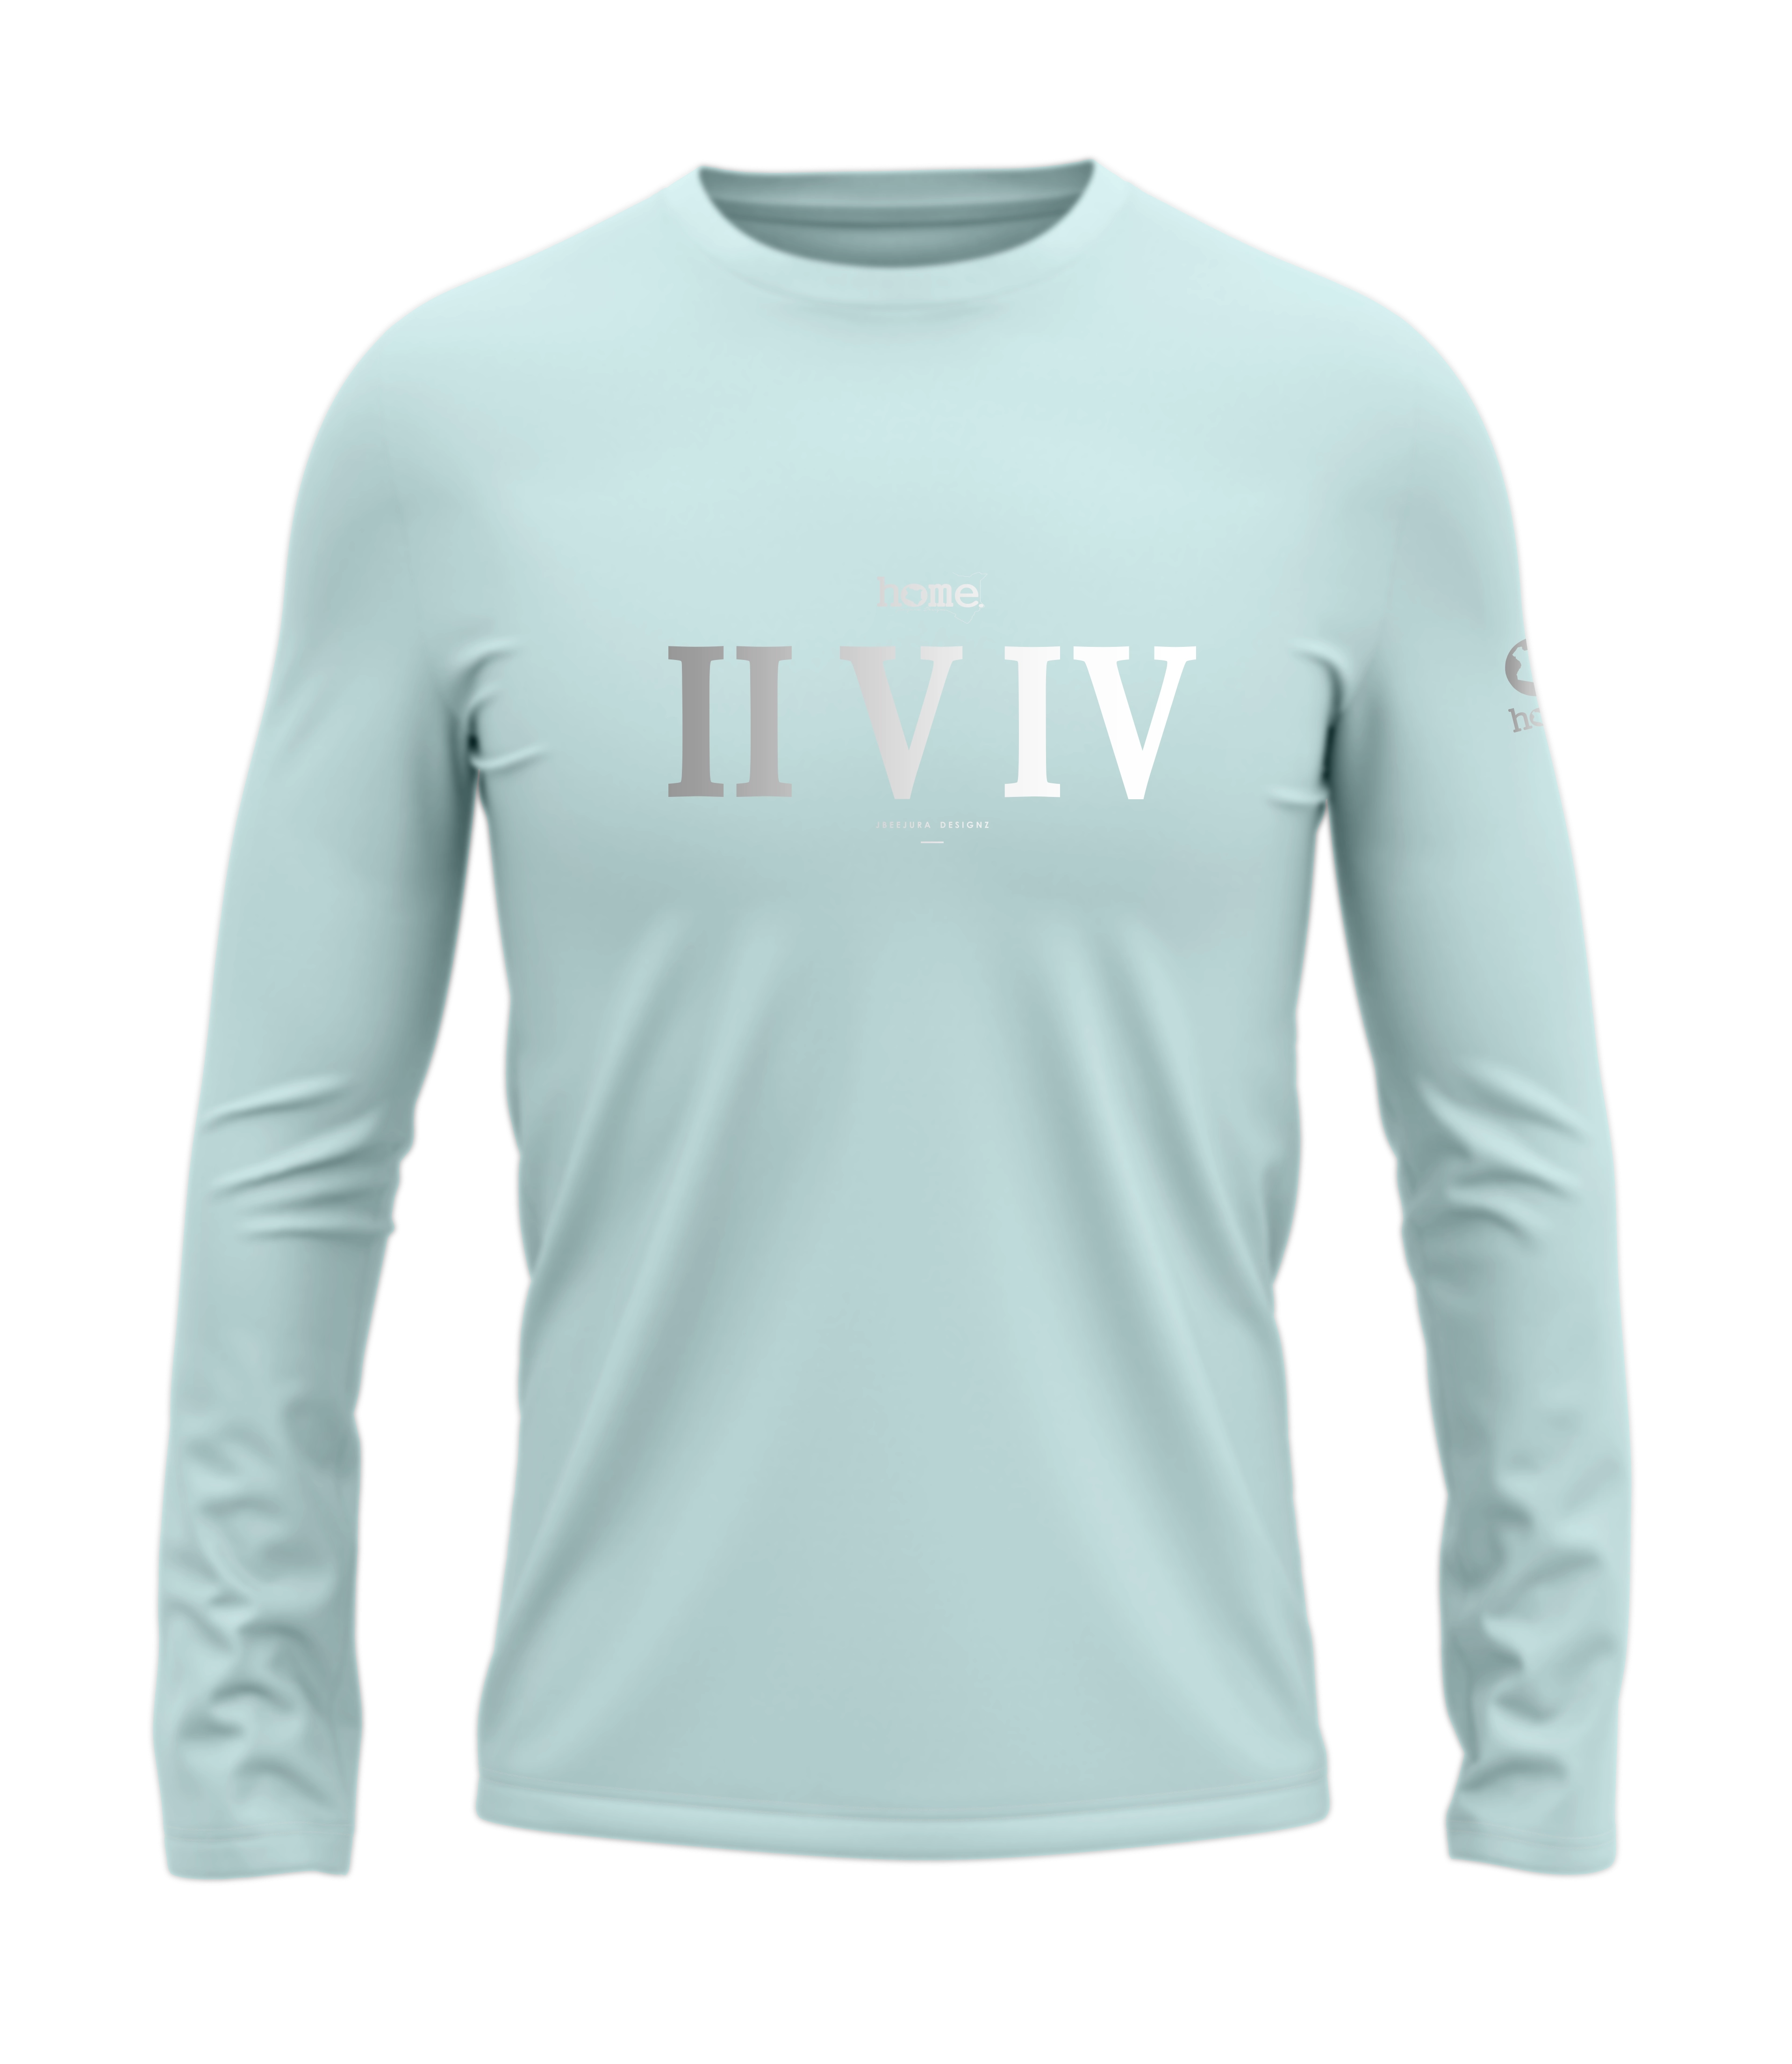 home_254 LONG-SLEEVED MISTY BLUE T-SHIRT WITH A SILVER ROMAN NUMERALS PRINT – COTTON PLUS FABRIC